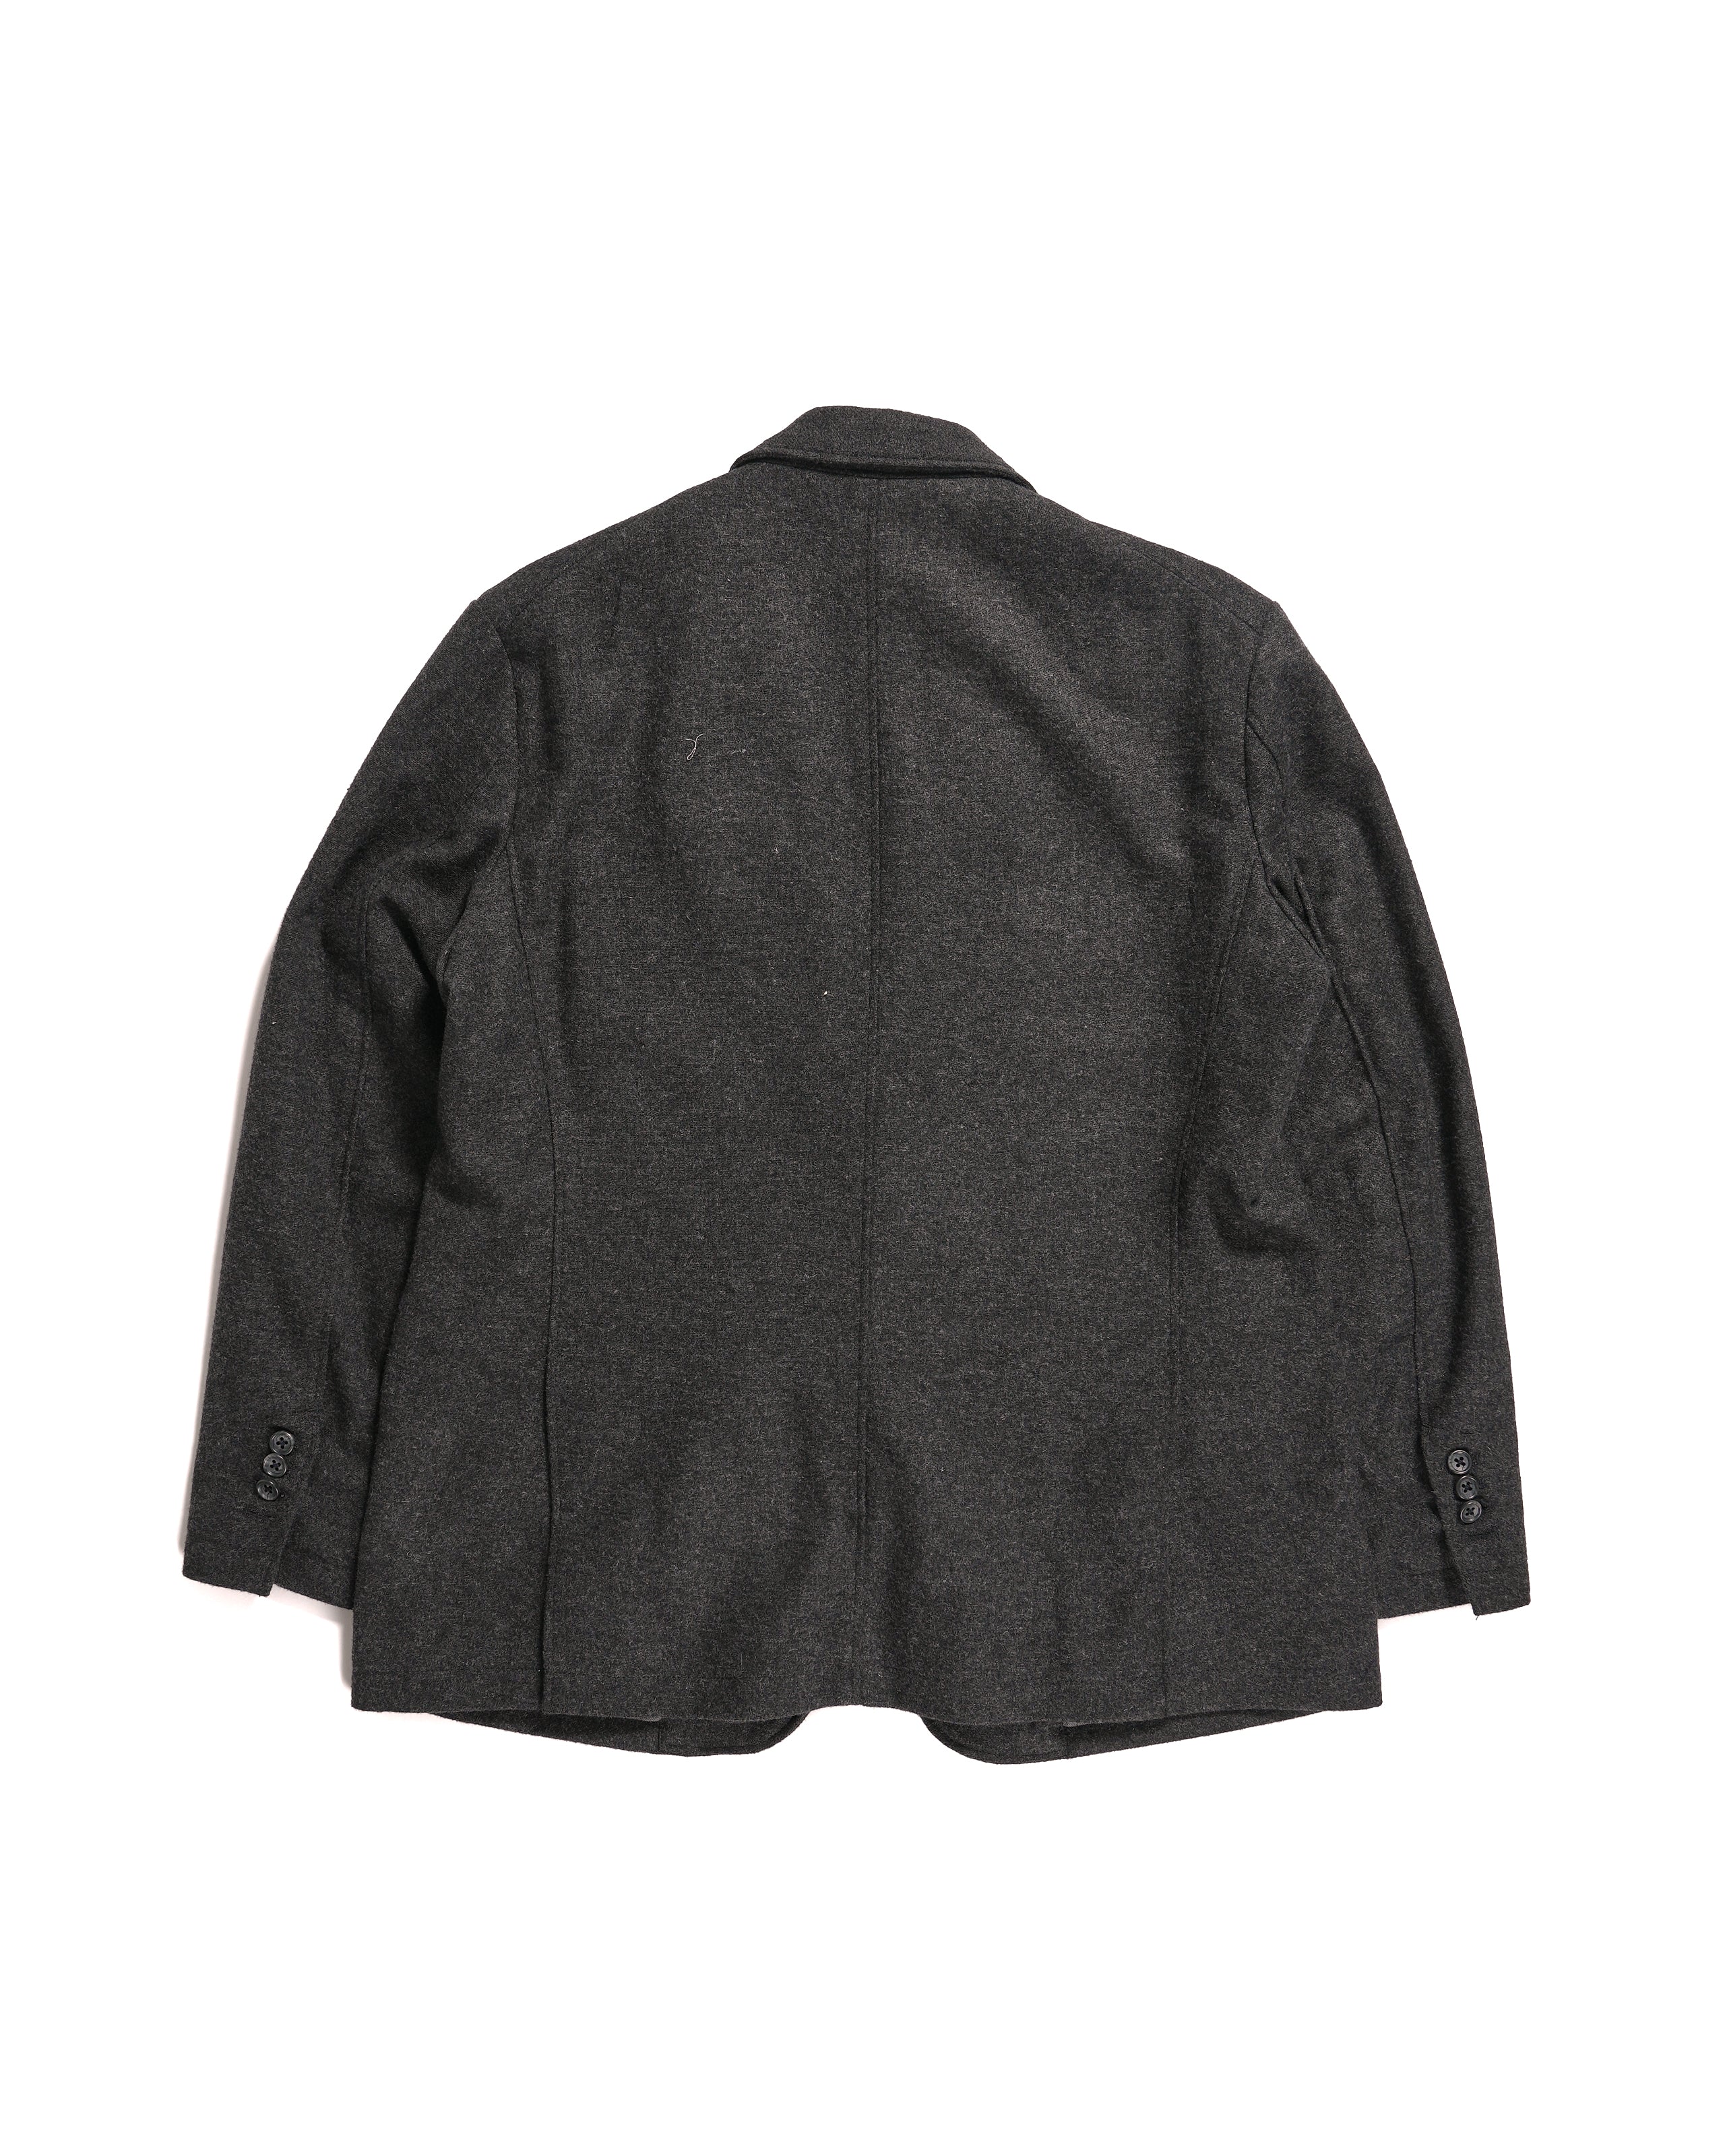 Andover Jacket - Grey Solid Poly Wool Flannel | Nepenthes New York